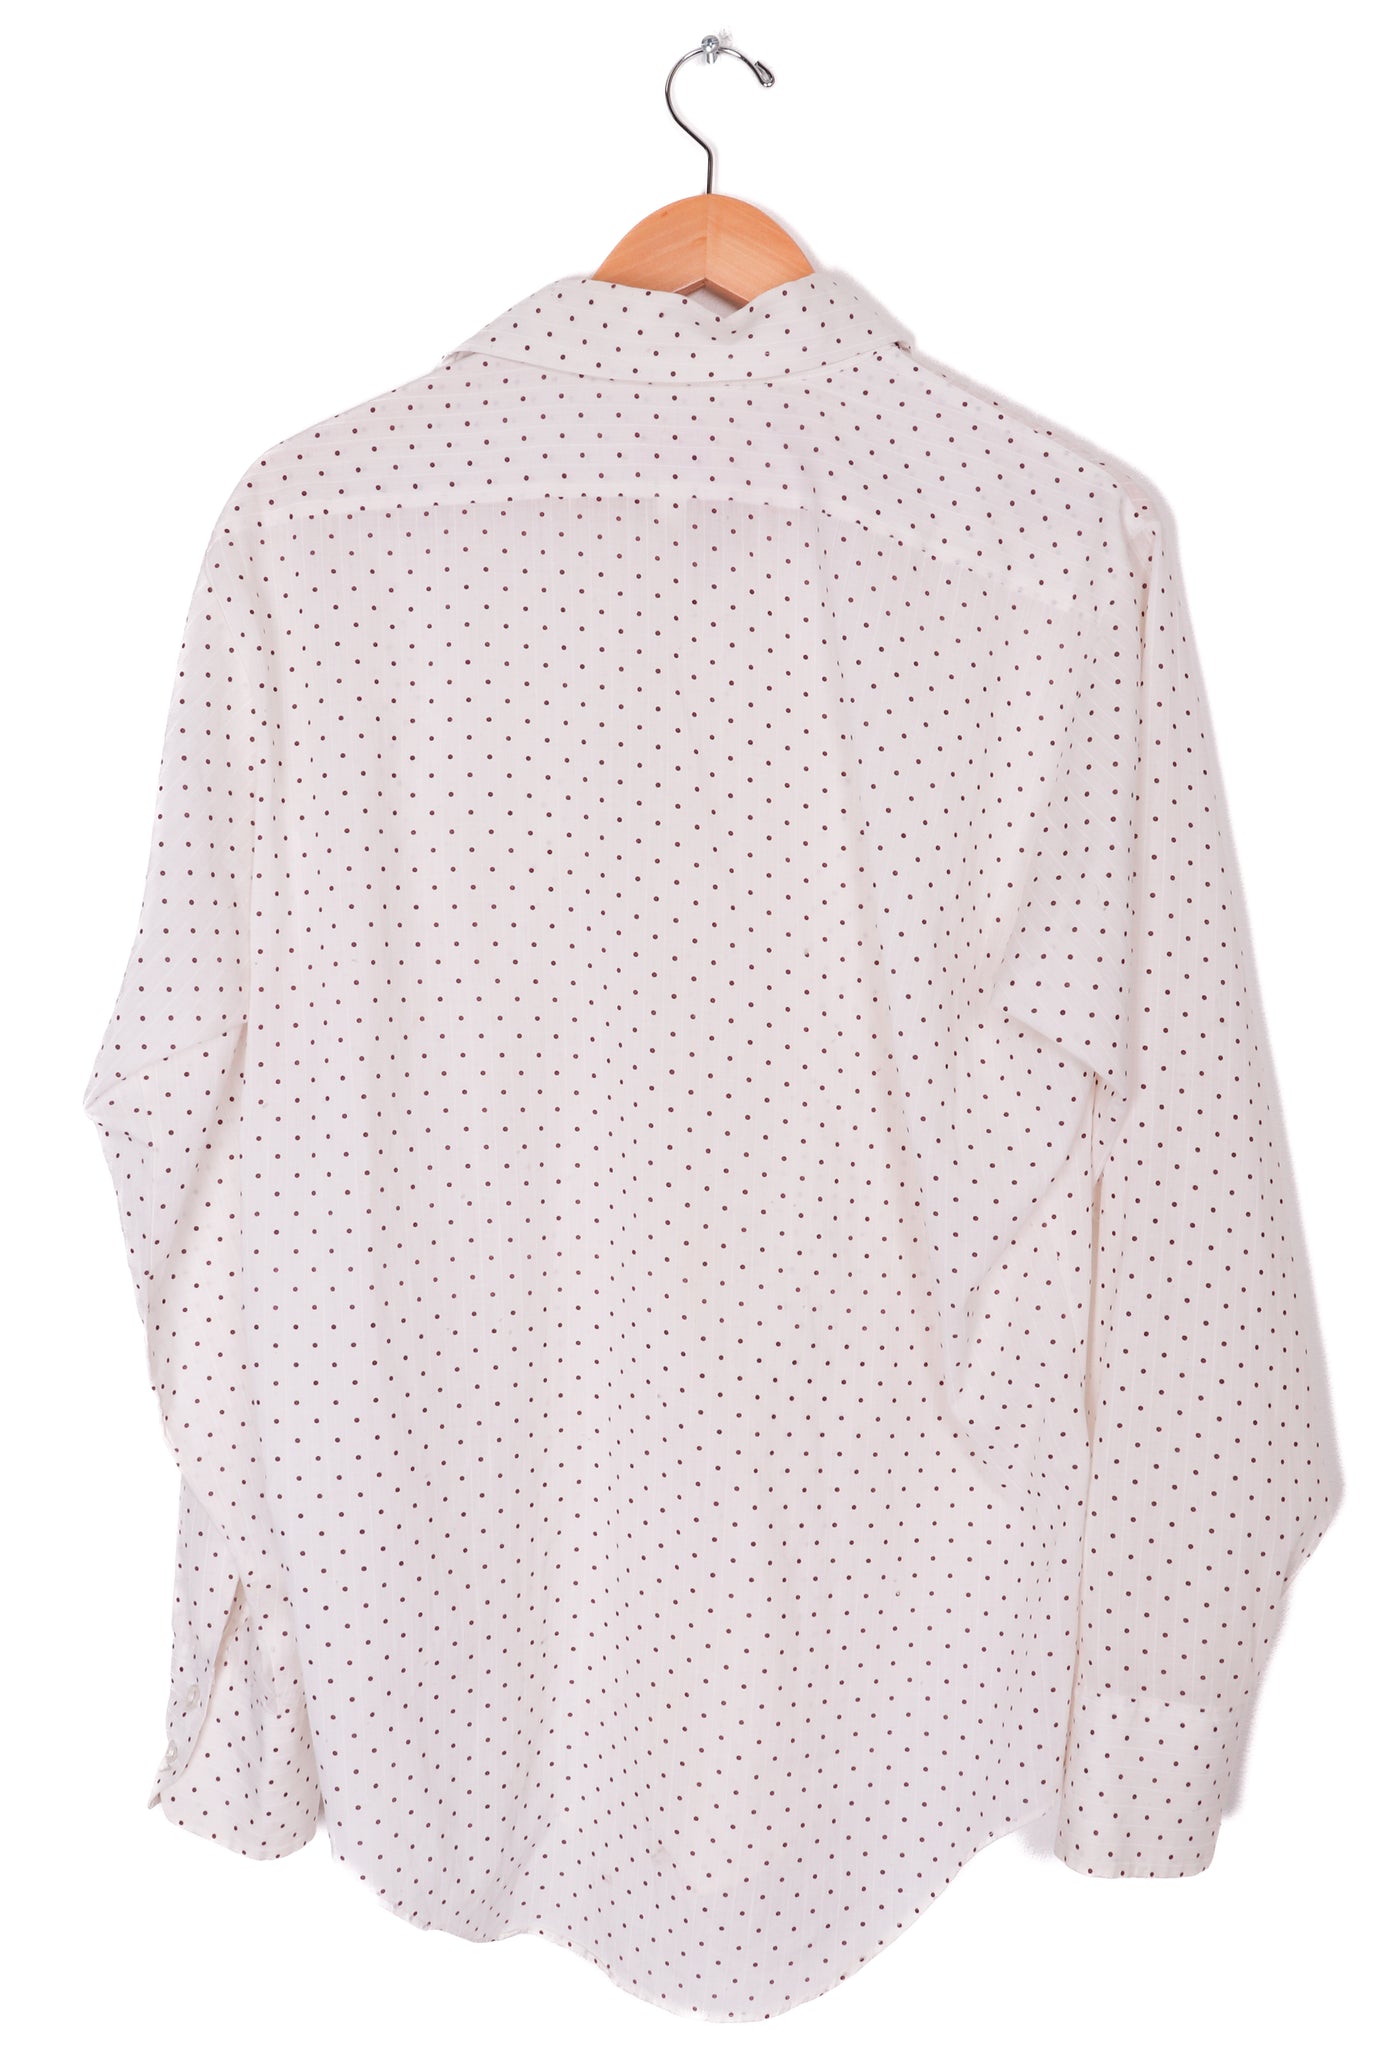 60s-70s Getaway by Arrow Polka Dot Button Up